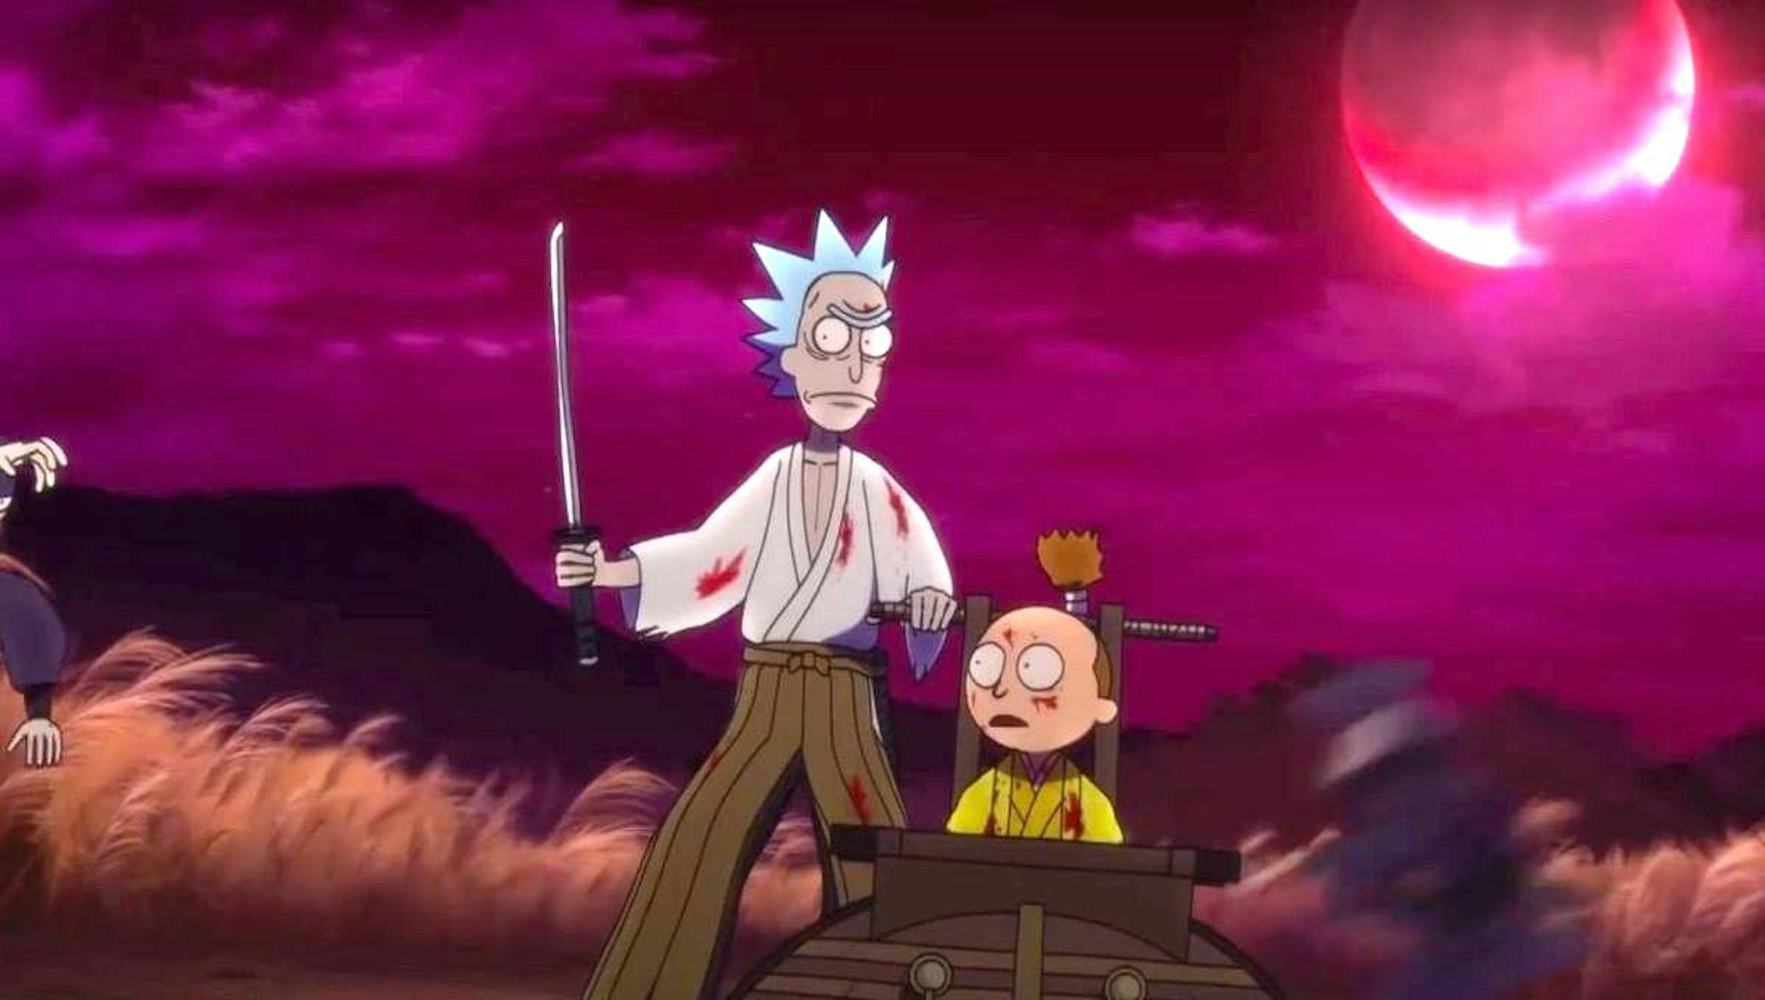 Rick And Morty Season 4 Episode 6 Release Date May Come April 1